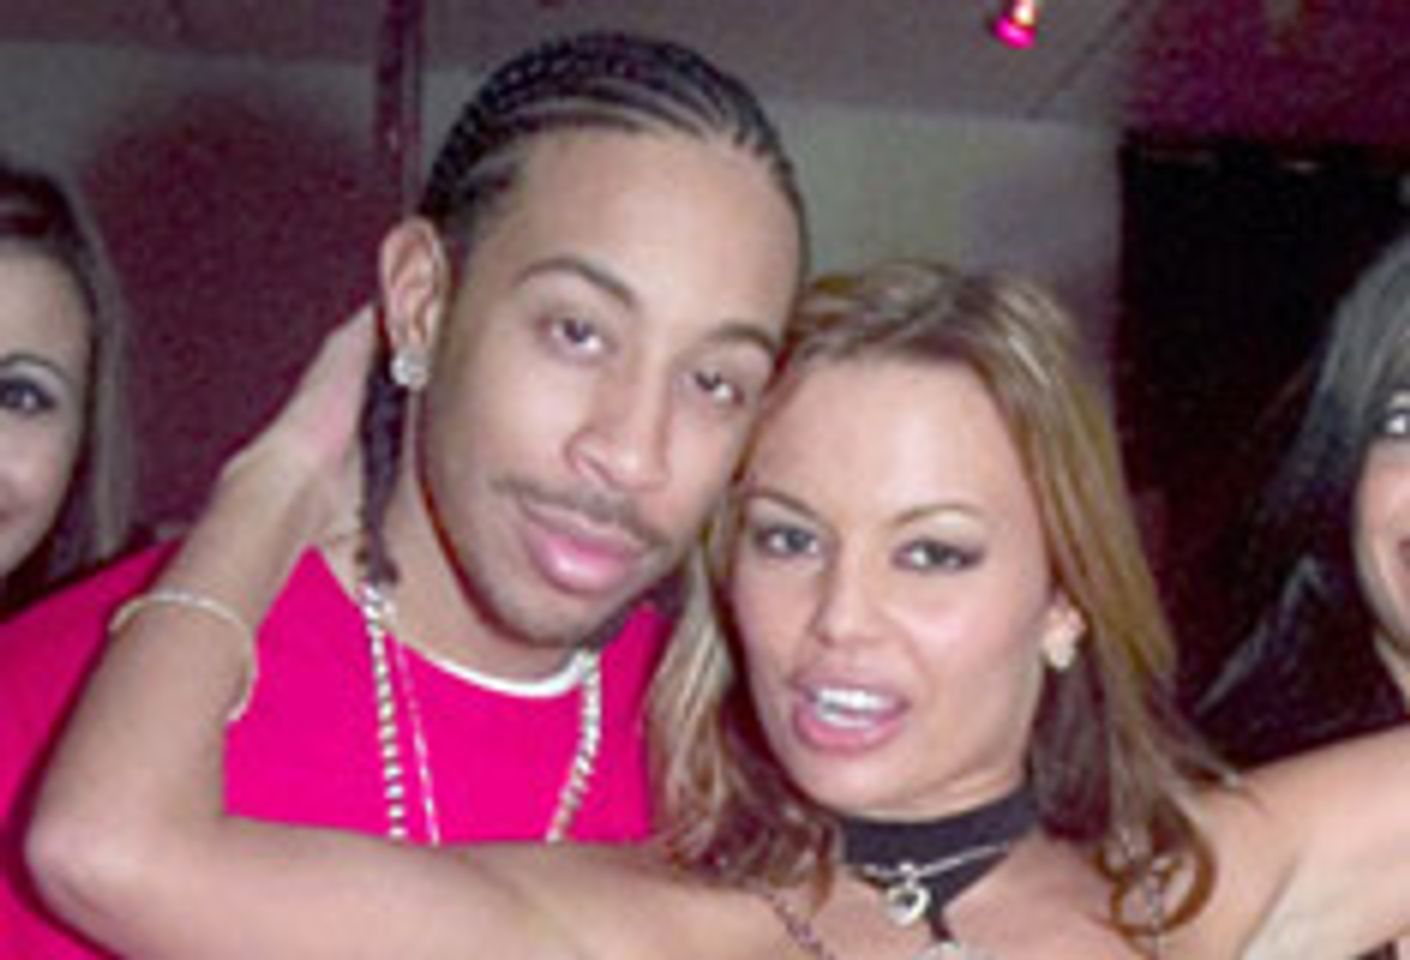 Ludacris, InterClimax Team Up on <i> Red Light District </i>